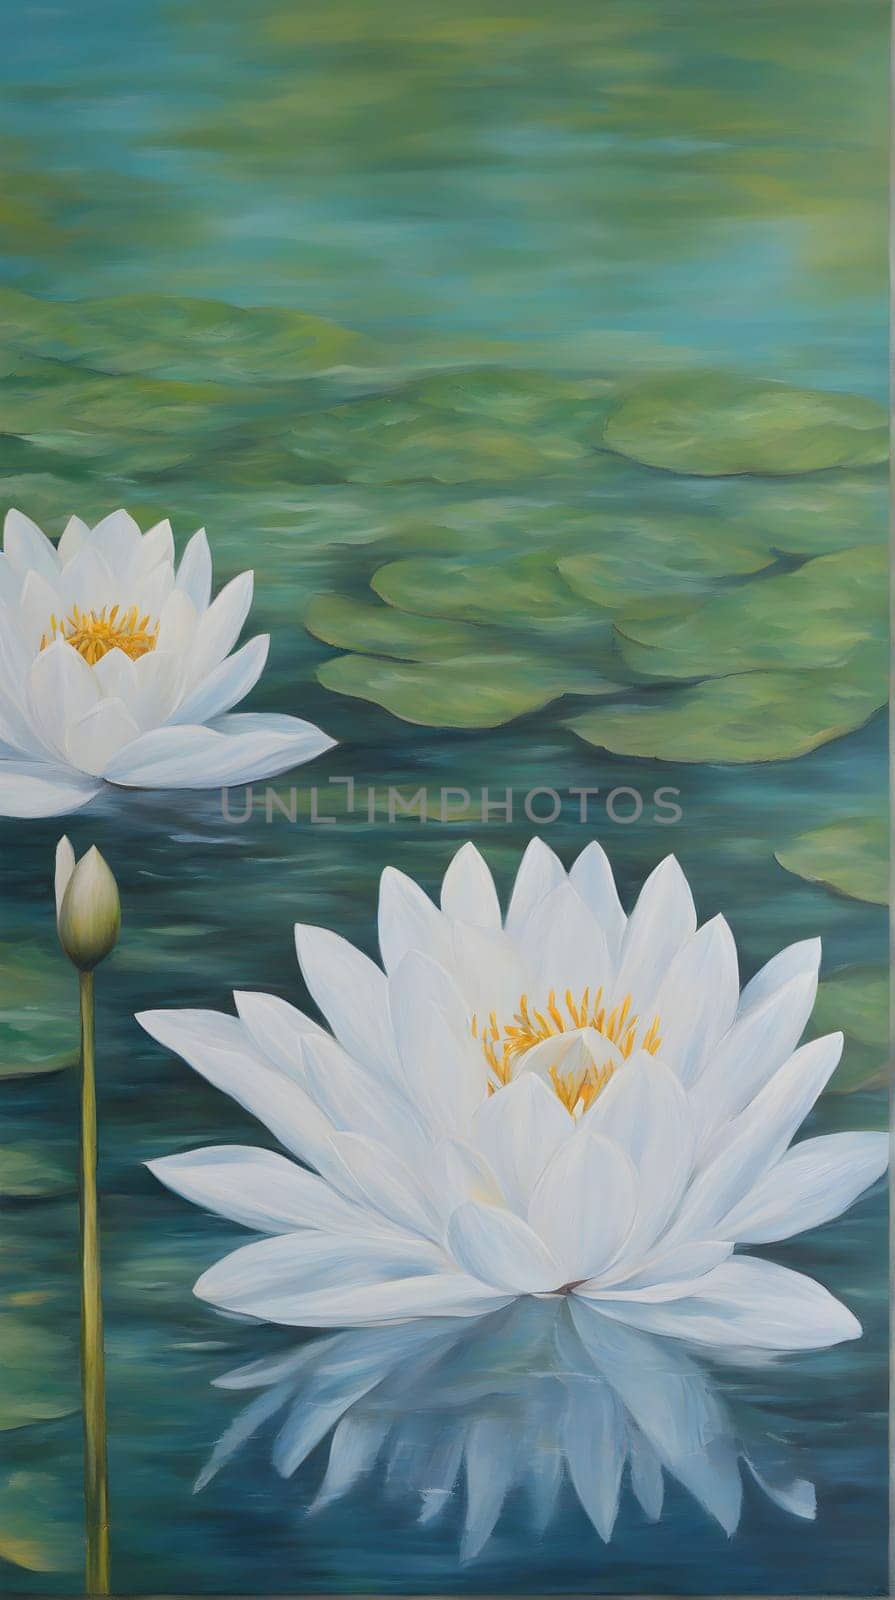 Painting acrylic on canvas Water lilies on the water surface Lotus flower as an. Wall art, home decor, background Generate AI